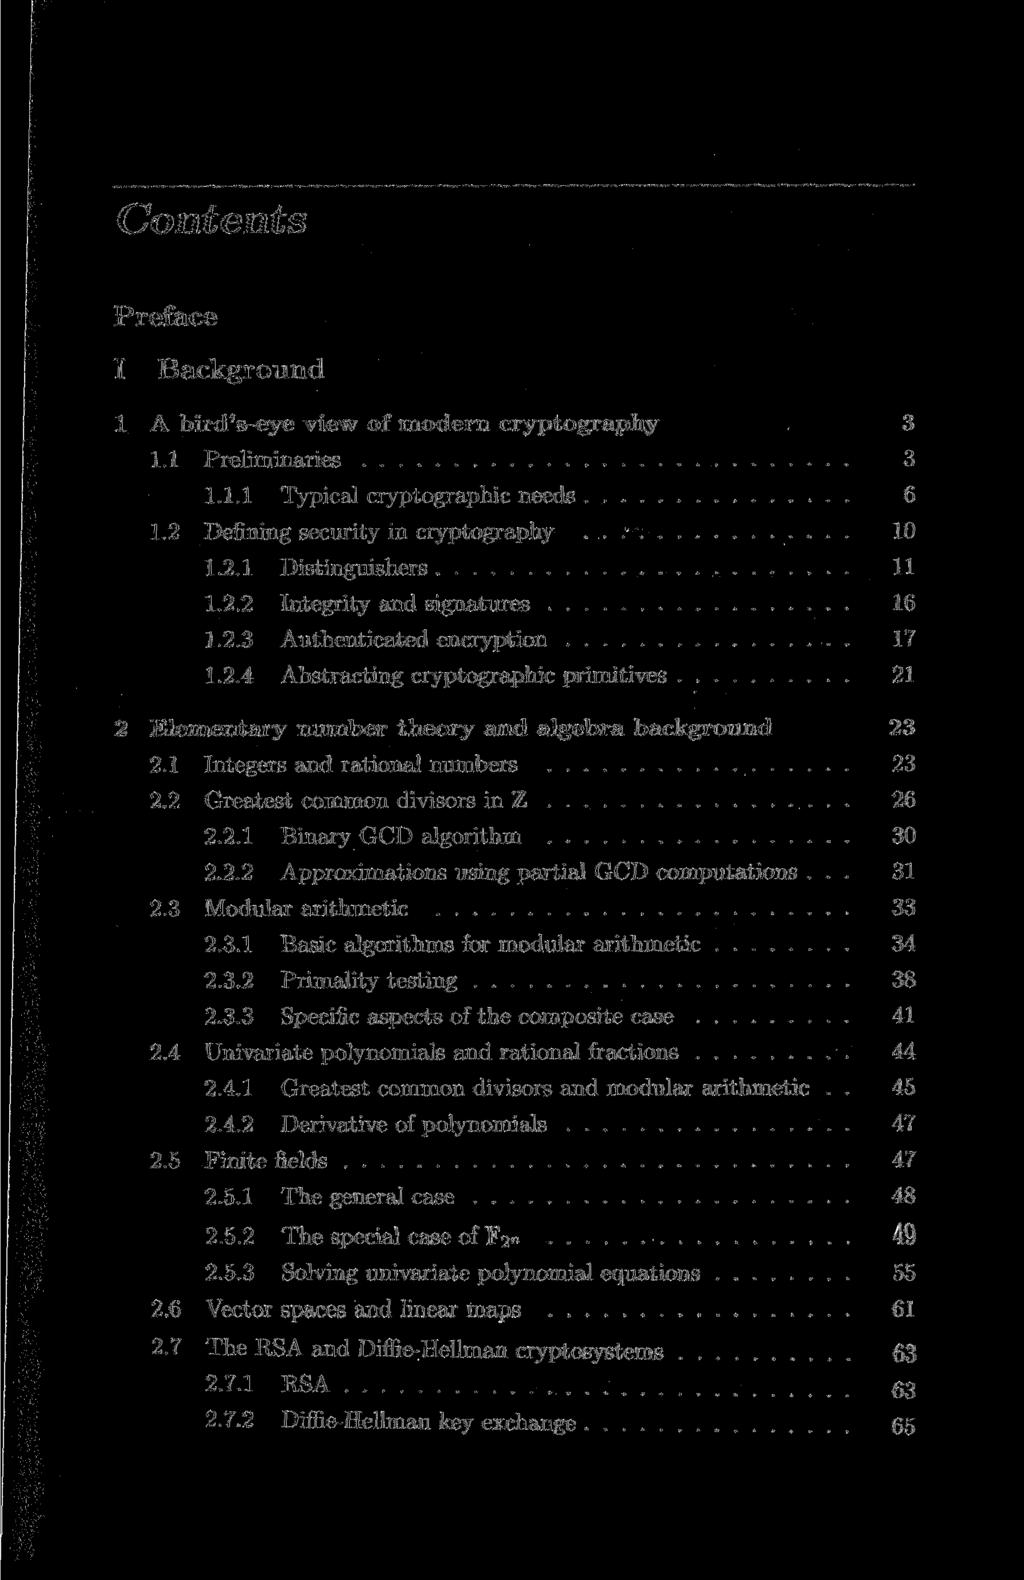 Contents Preface I Background 1 A bird's-eye view of modern cryptography 3 1.1 Preliminaries 3 1.1.1 Typical cryptographic needs 6 1.2 Defining security in cryptography 10 1.2.1 Distinguishes 11 1.2.2 Integrity and signatures 16 1.